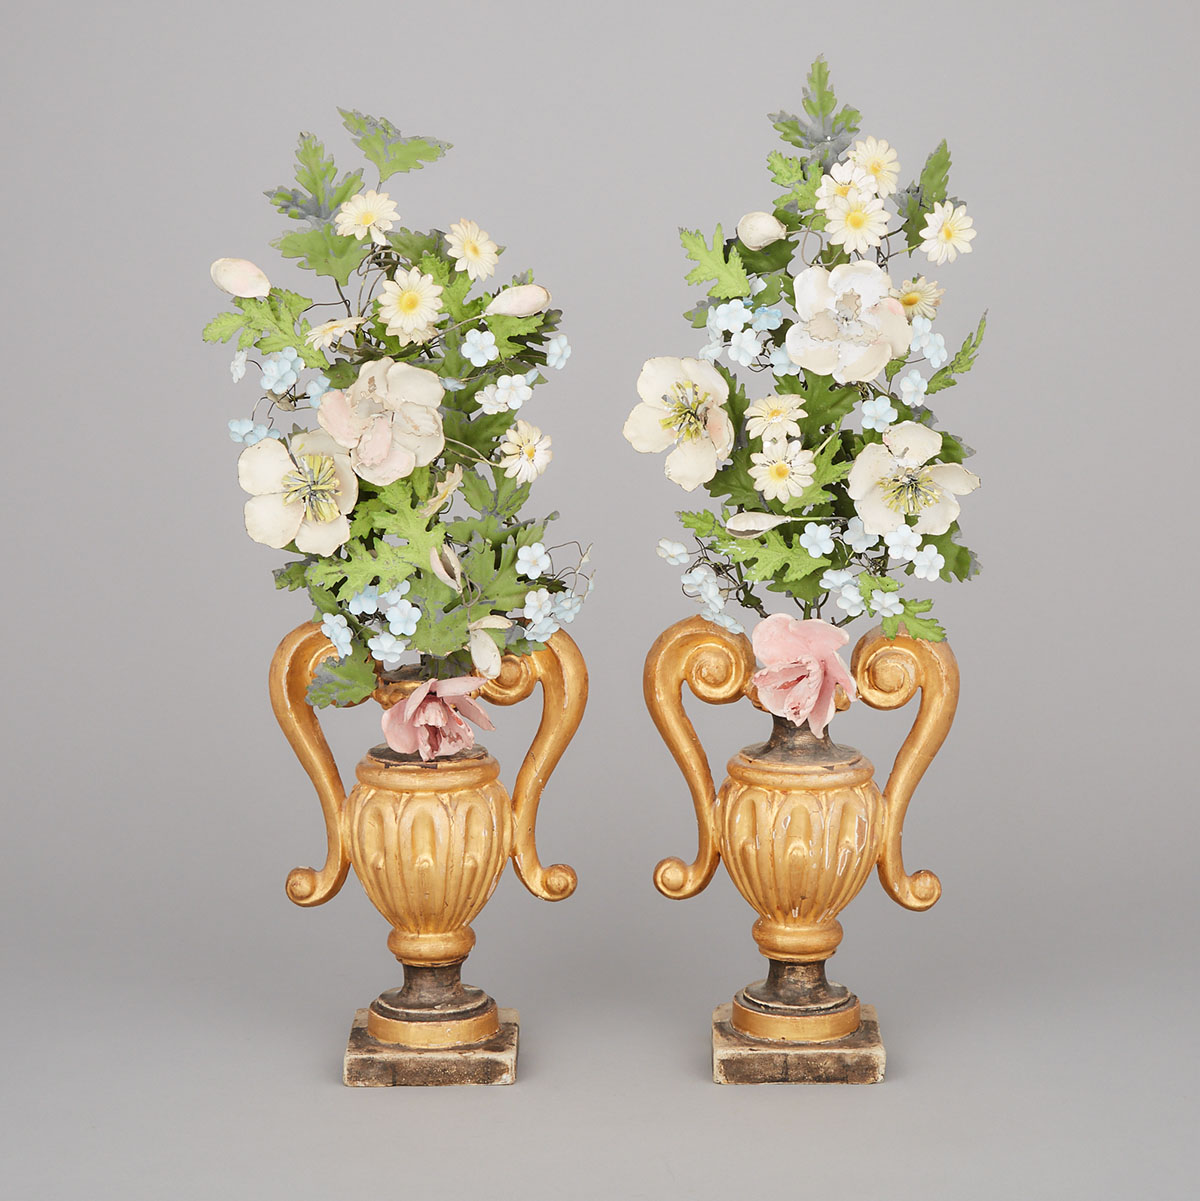 Pair of Italian Giltwood and Tole Bouquet Form Garnitures, mid 20th century